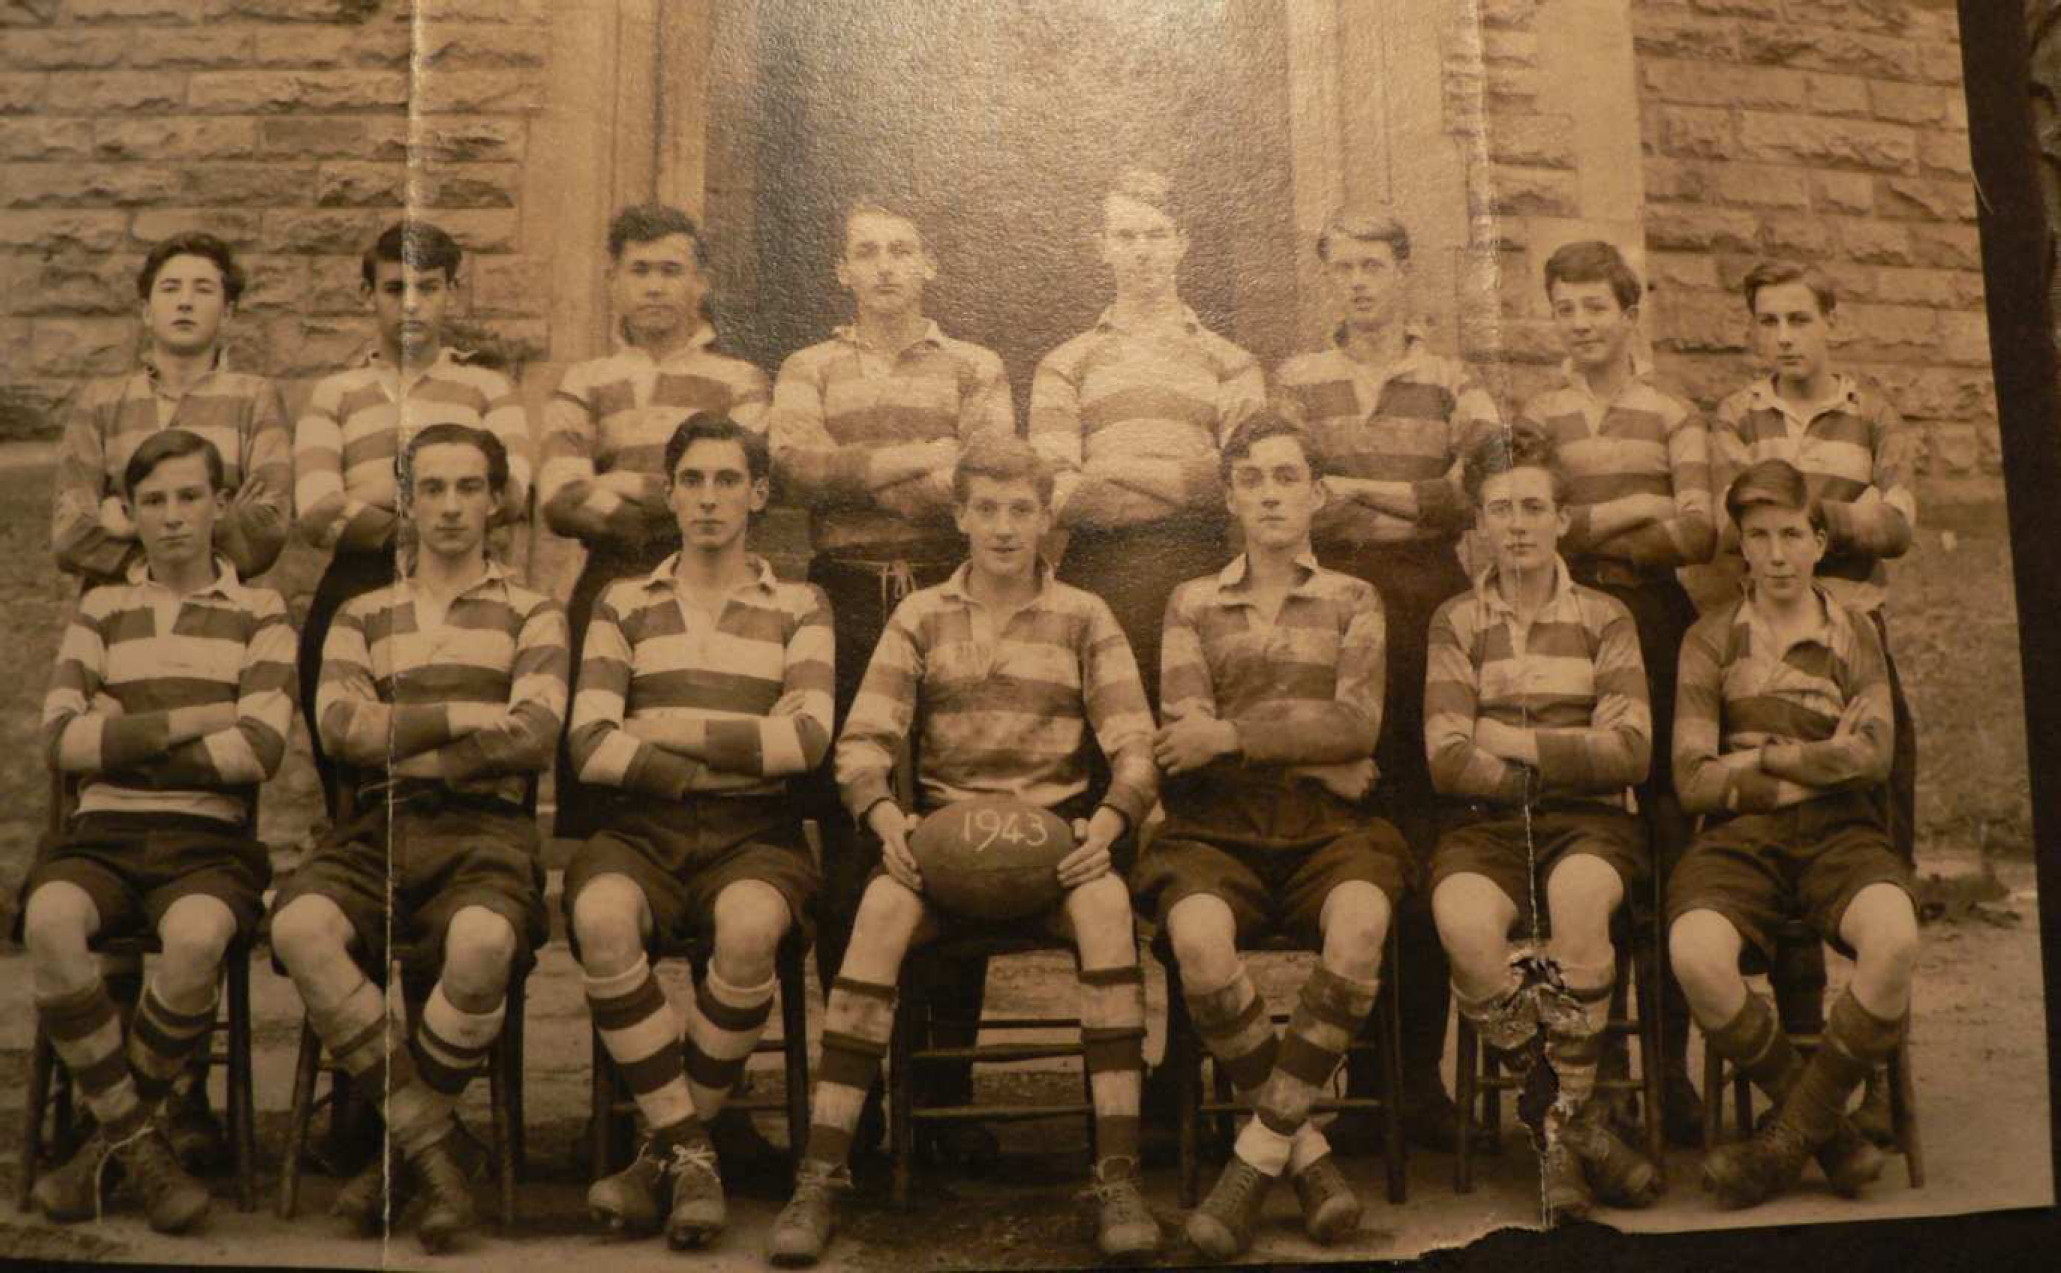 sepia photo\' of eight standing and seven seated teenage boys wearing sports outfits including jerseys striped with wide horizontal pale and dark bands, with the middle boy at the front holding a rugby-ball with \'1943\' painted on it